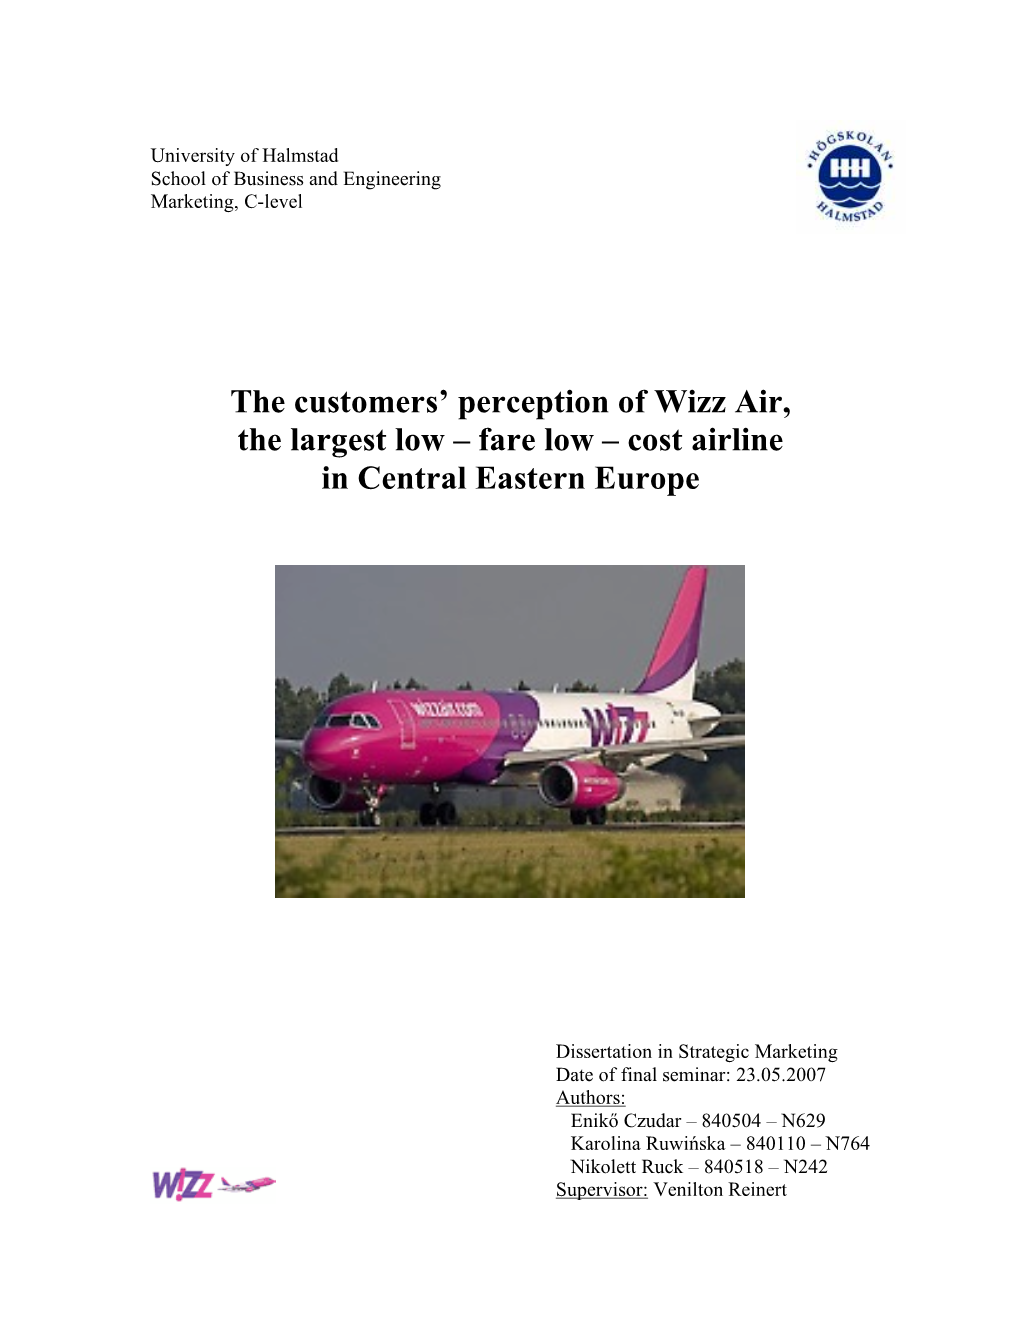 The Customers' Perception of Wizz Air, the Largest